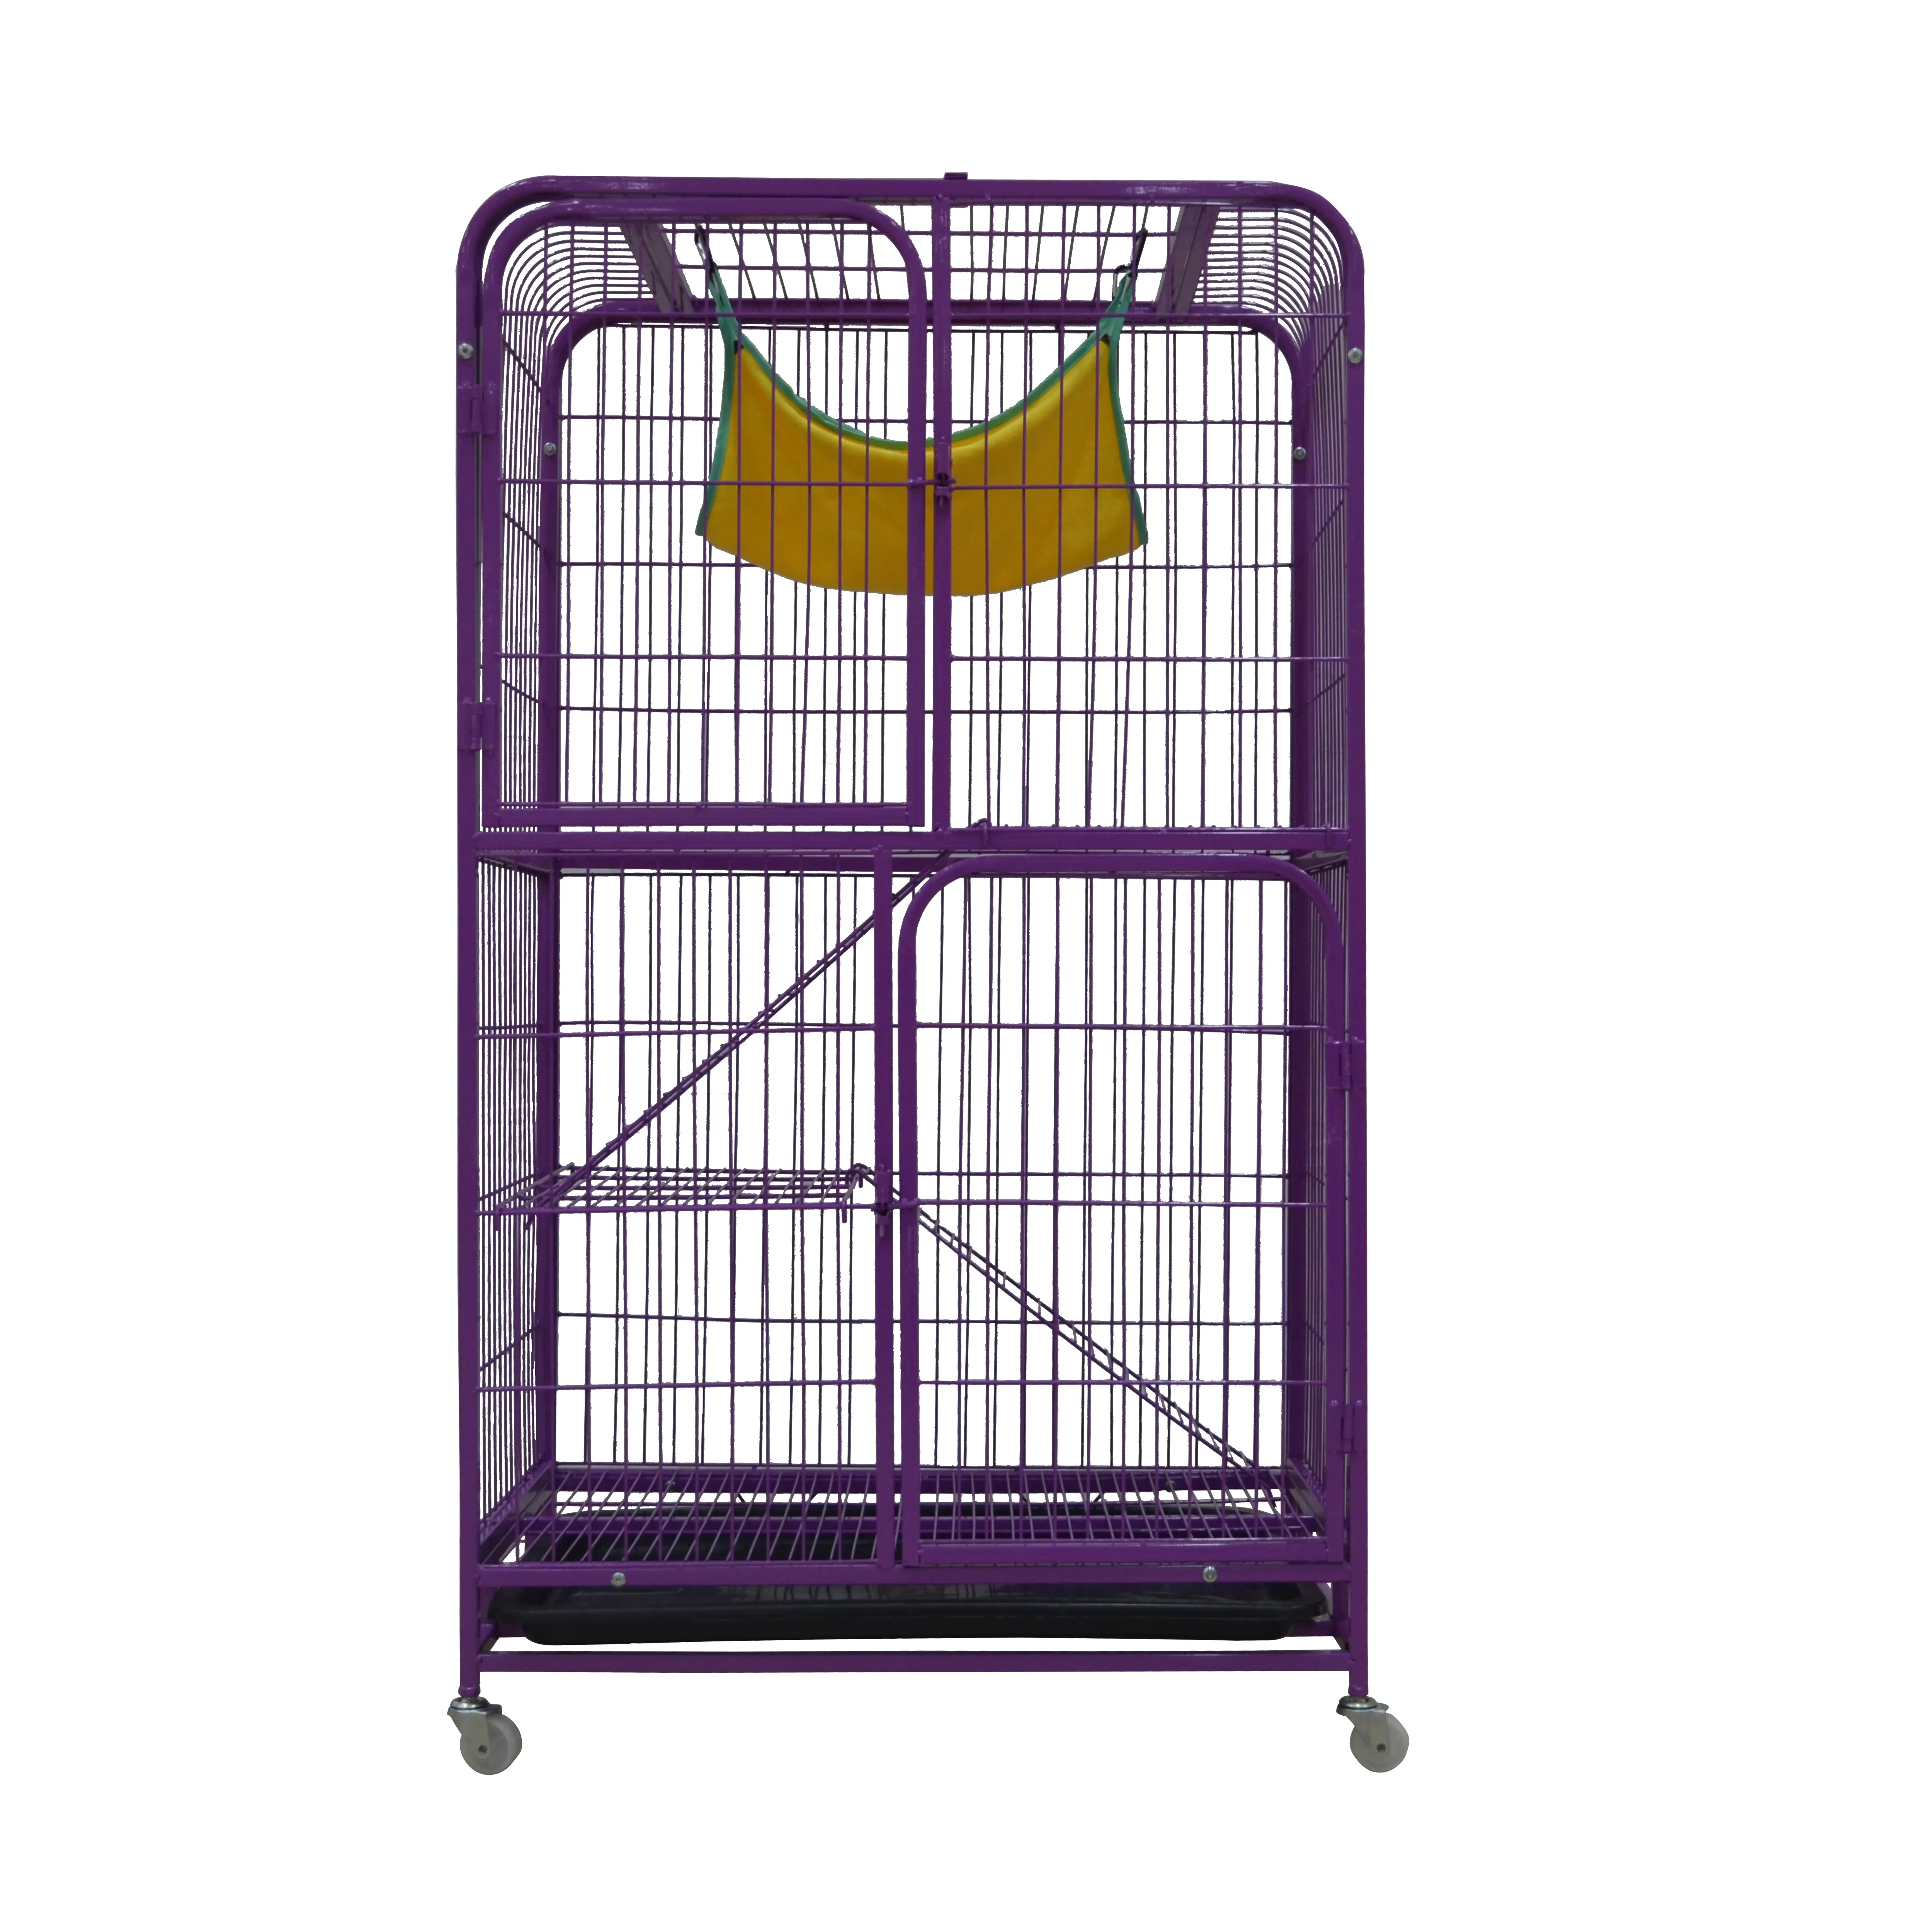 Zunhua Meihua Wholesale New Customizable color Cat Playpen/Cat Cage Includes 3 Adjustable Resting Platforms